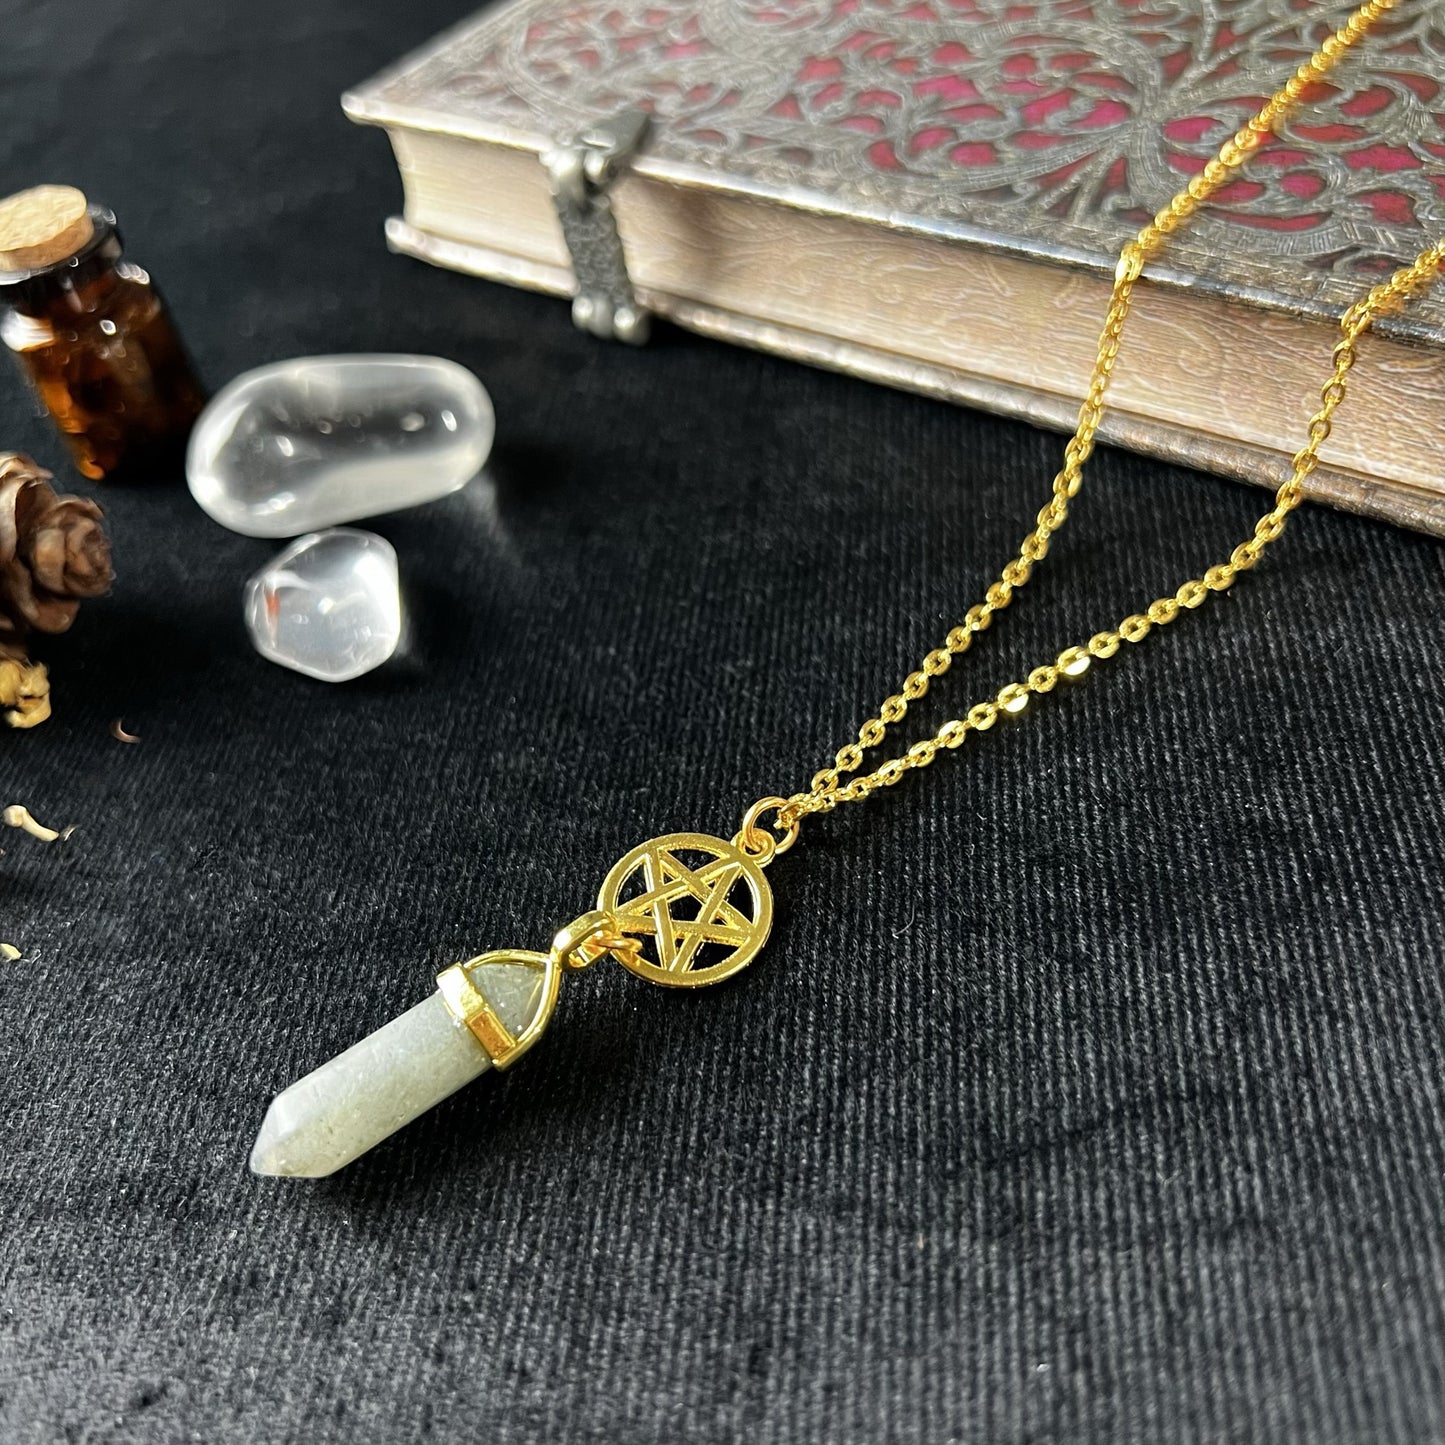 Golden labradorite and pentacle divination pendulum necklace - The French Witch shop